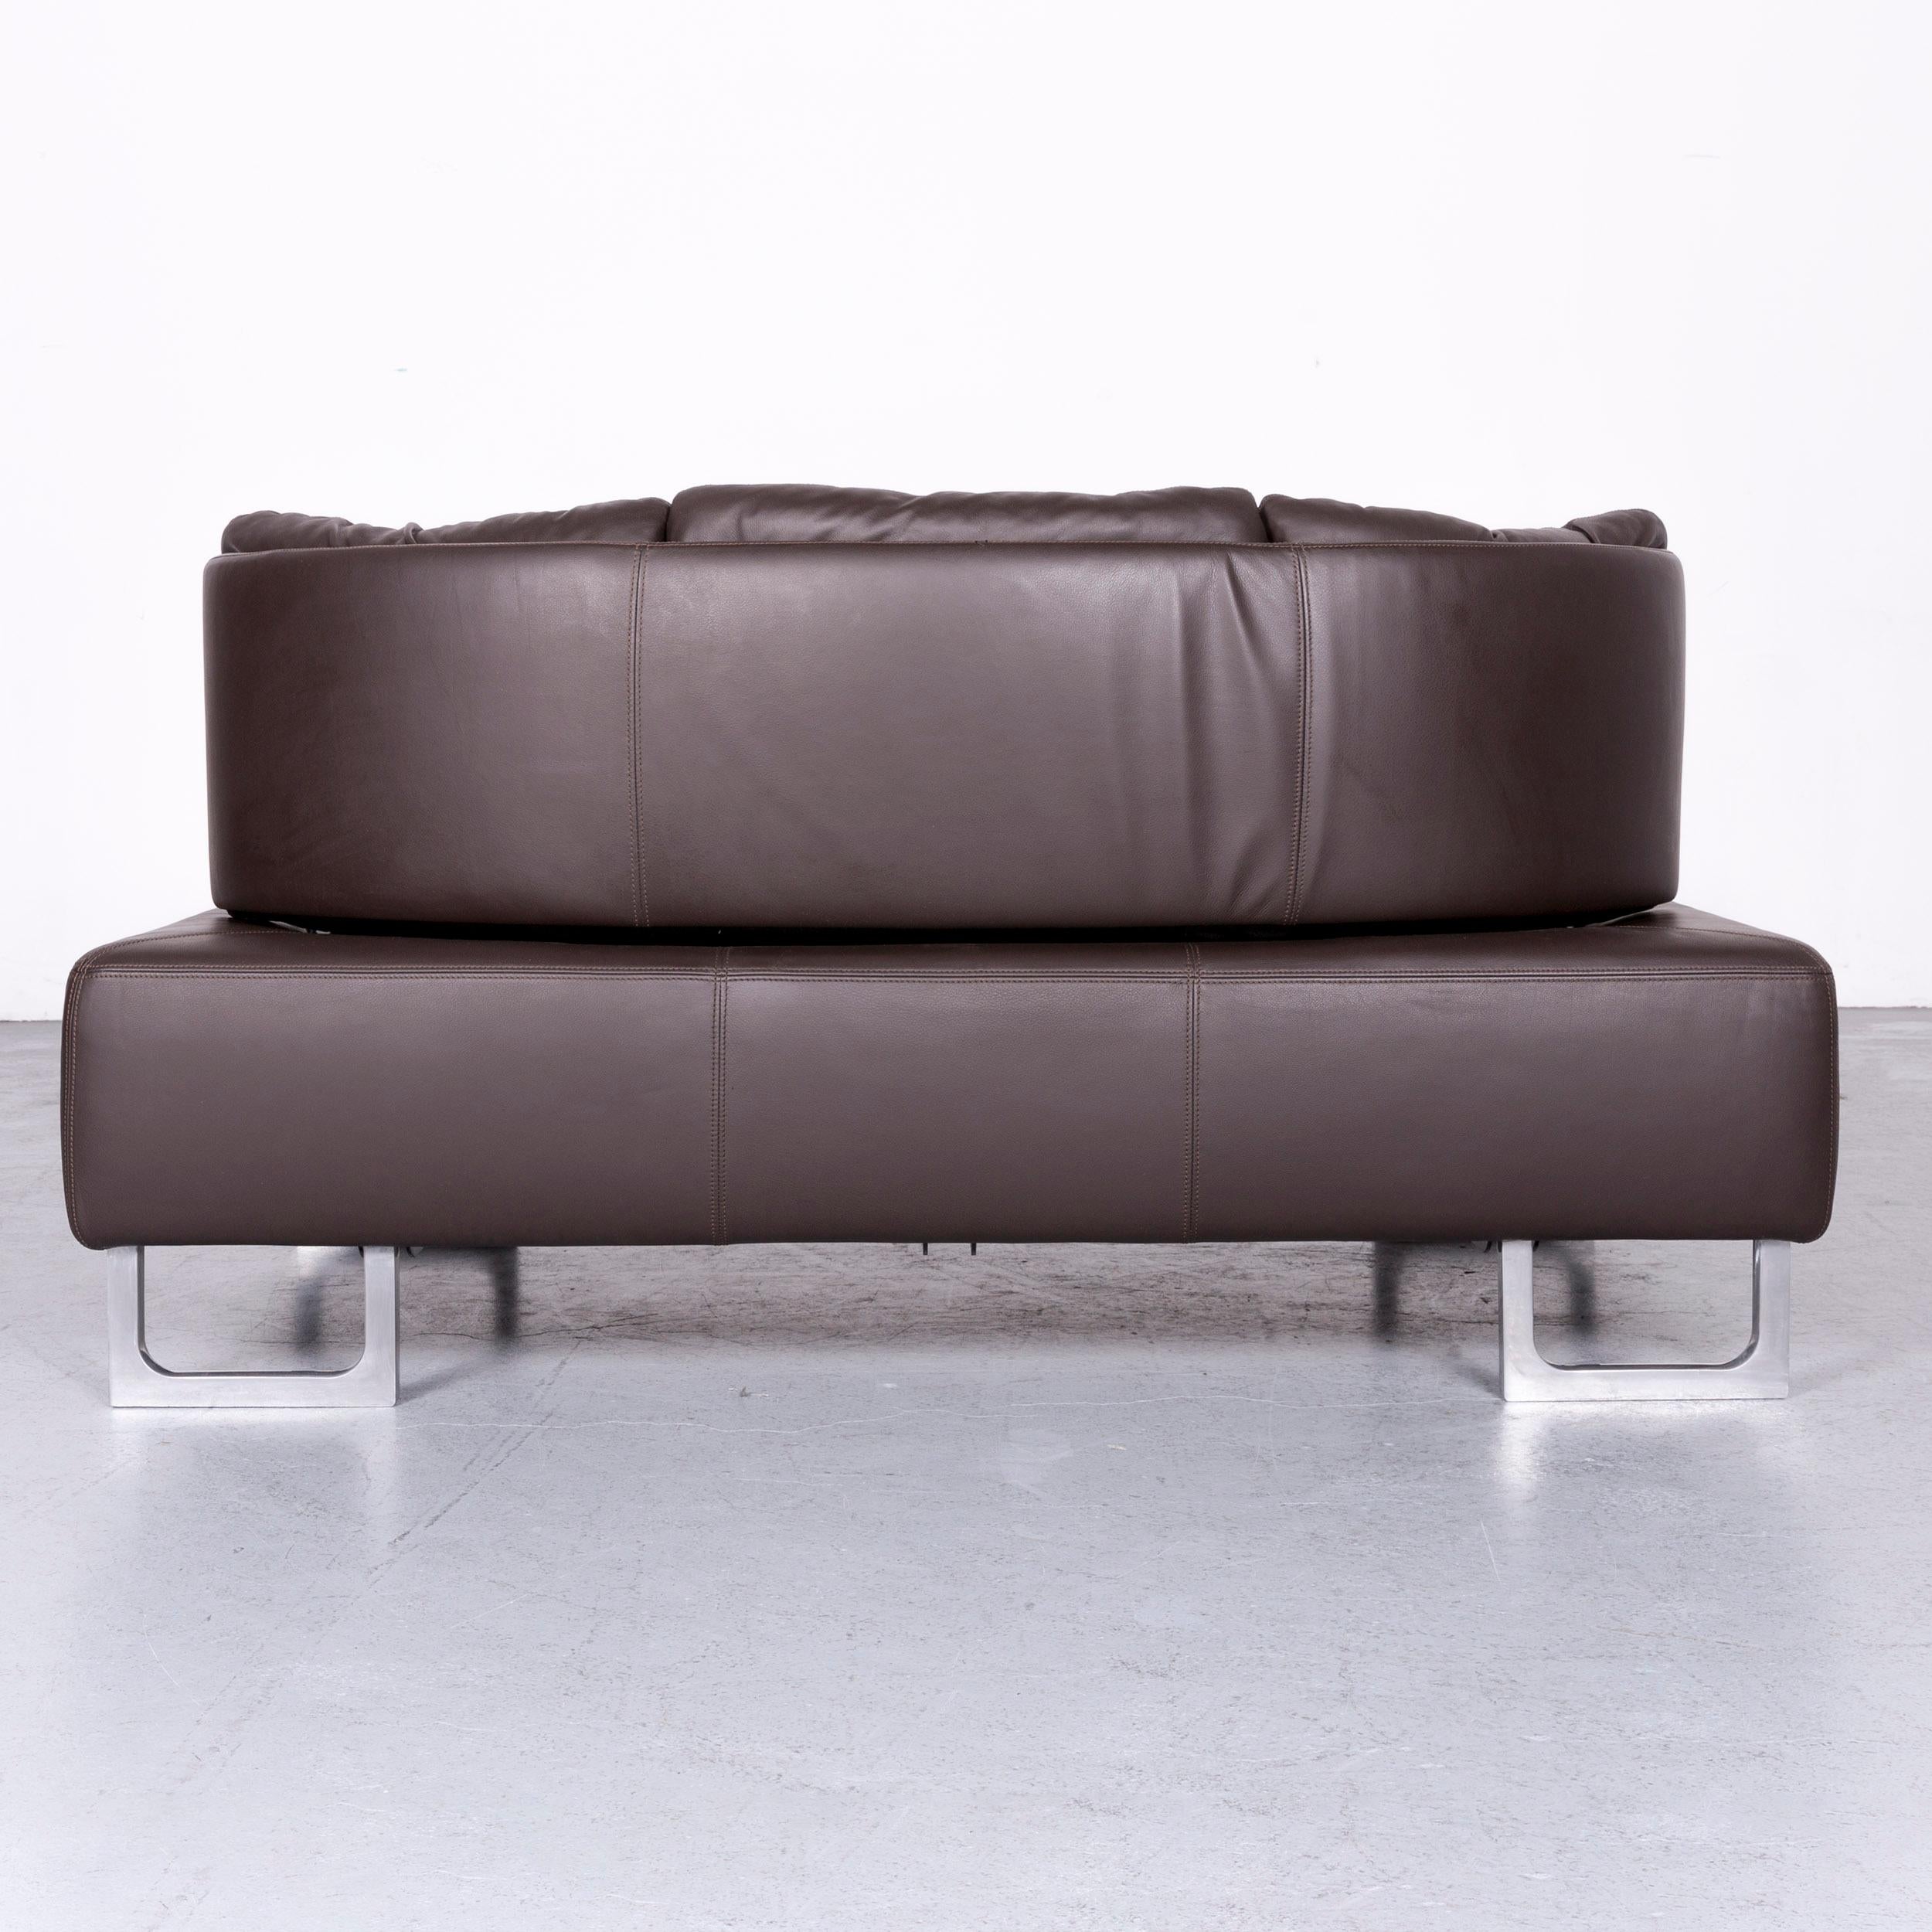 De Sede DS 165 Designer Leather Sofa Brown Two-Seat Couch In Good Condition For Sale In Cologne, DE